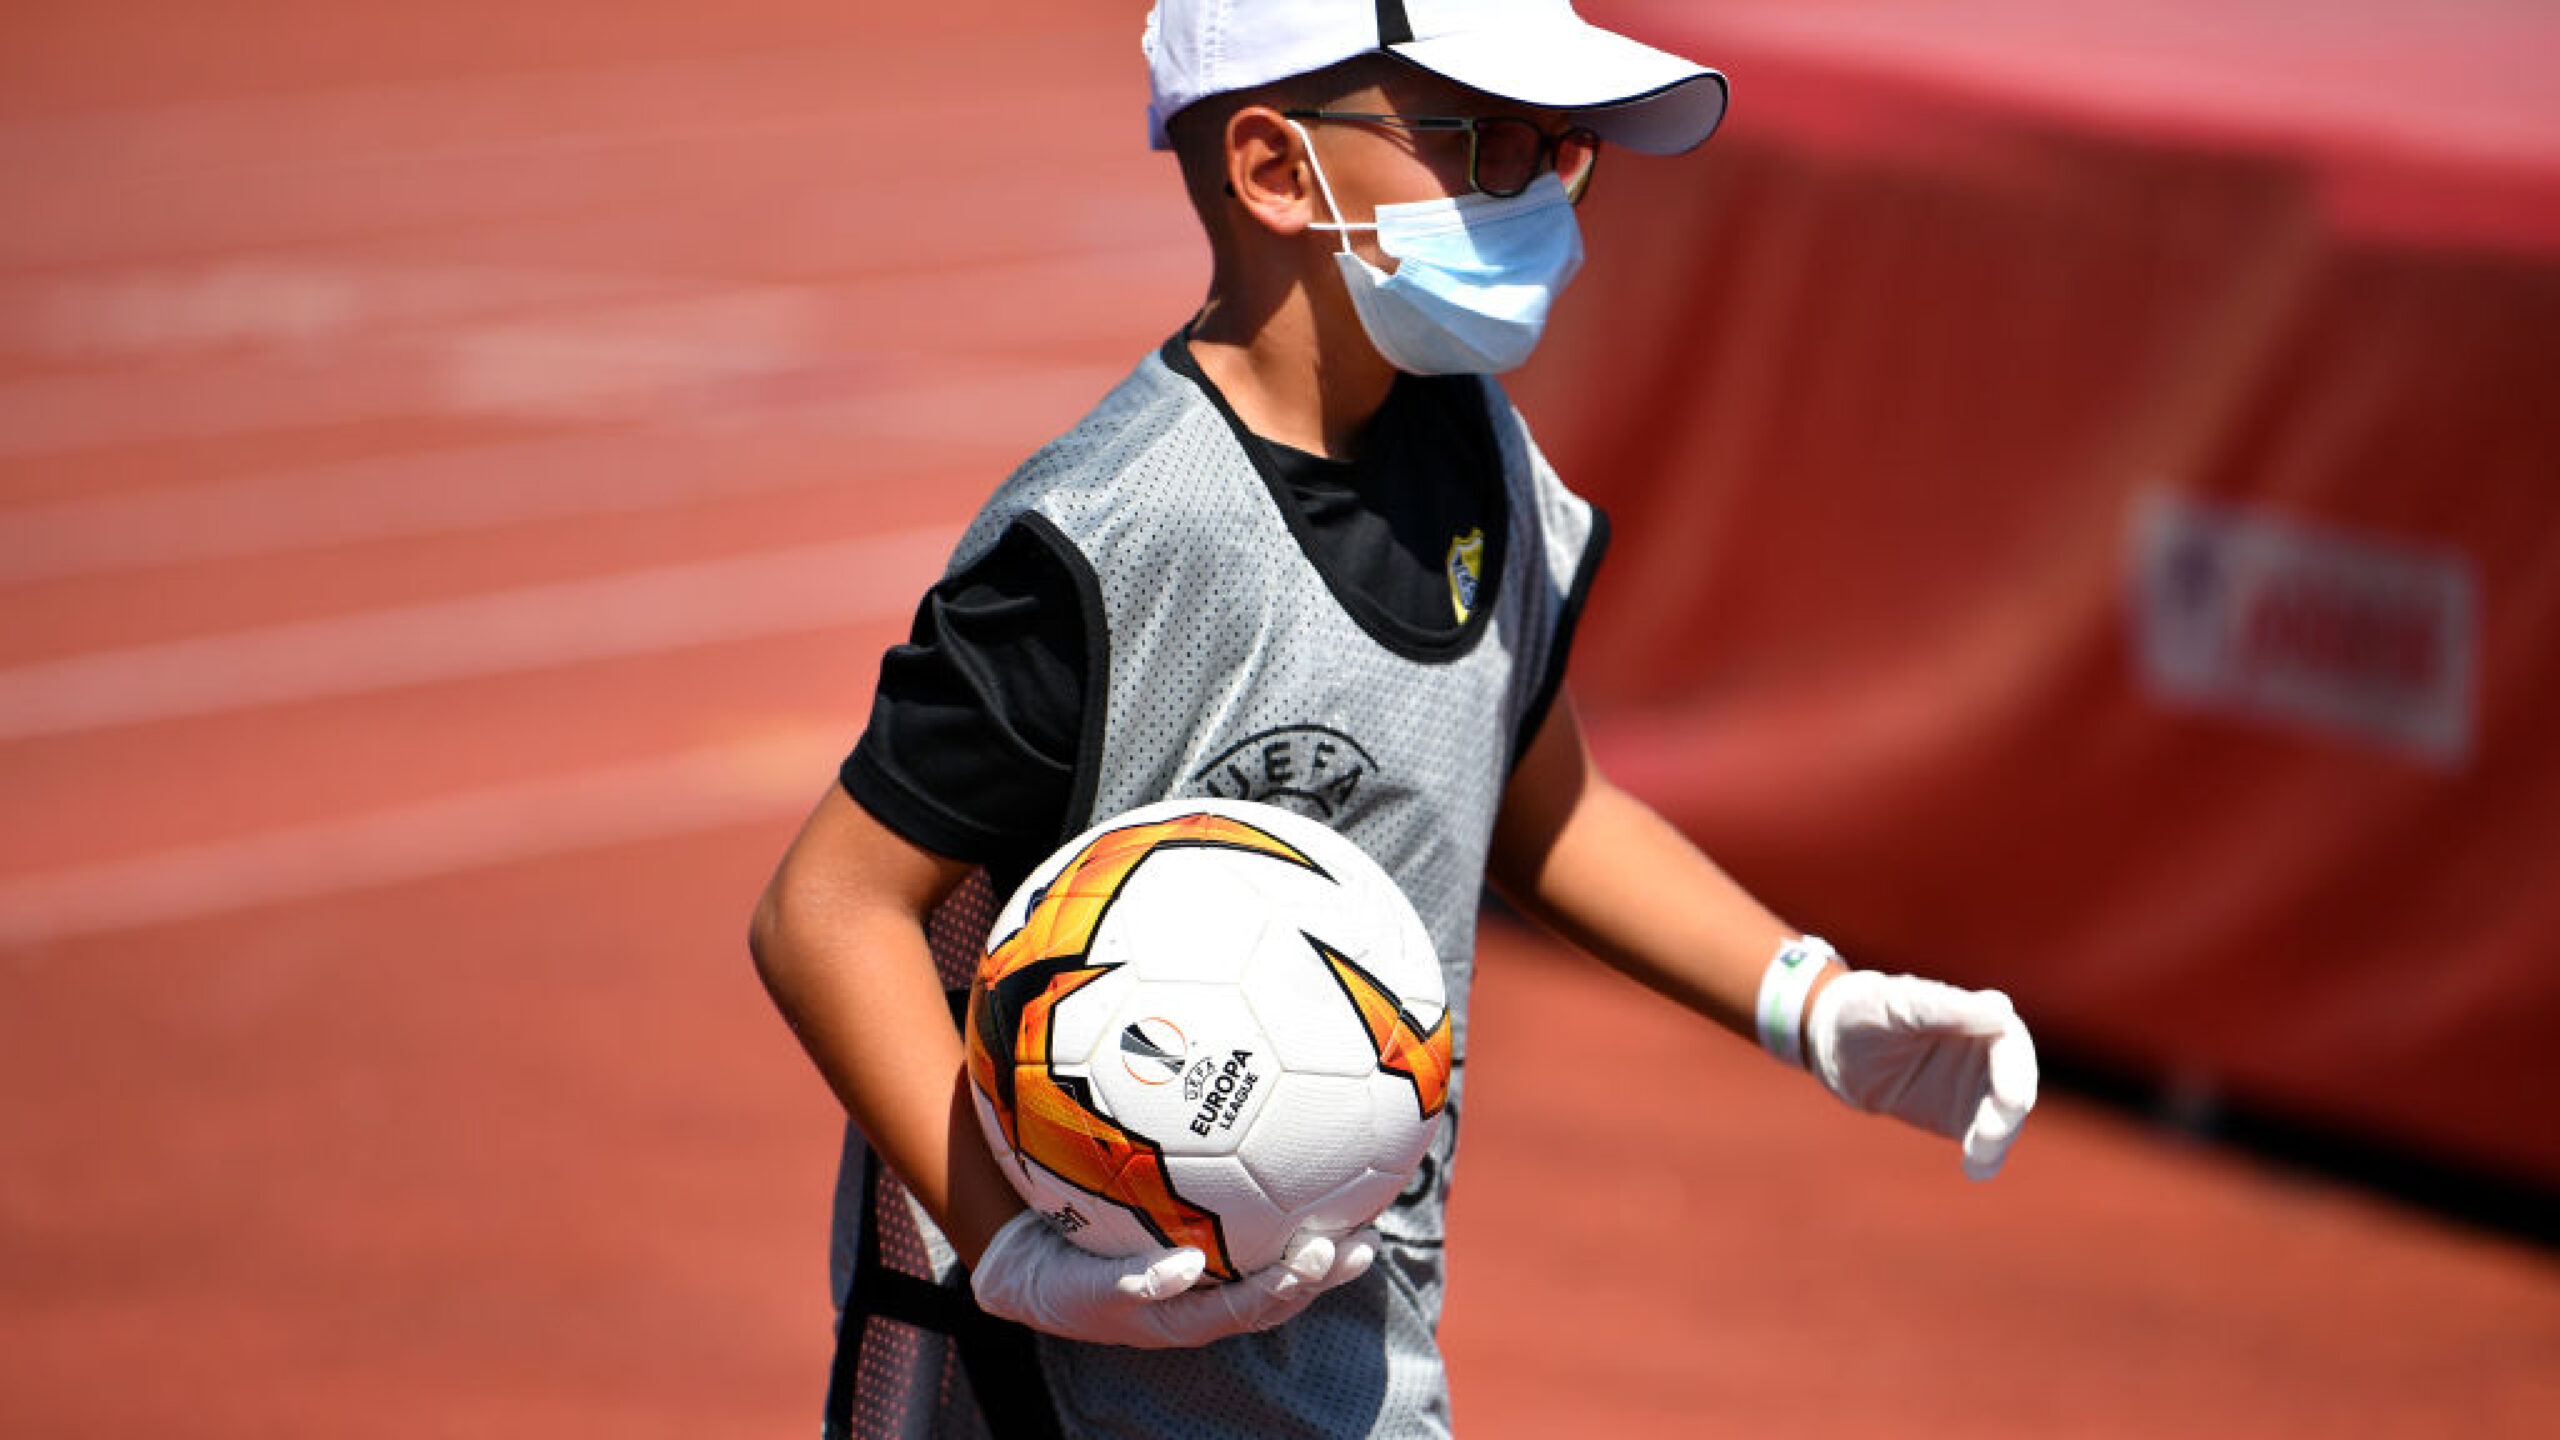 NYON, SWITZERLAND - AUGUST 08: S.S. A ball boy wearing protective equipment on during the UEFA Champions League 2020/21 Preliminary Round Semi-final match between S.S. Tre Fiori F.C. and Linfield FC at Colovray Sports Center on August 8, 2020, in Nyon, Switzerland (Photo by Harold Cunningham - UEFA/UEFA via Getty Images)